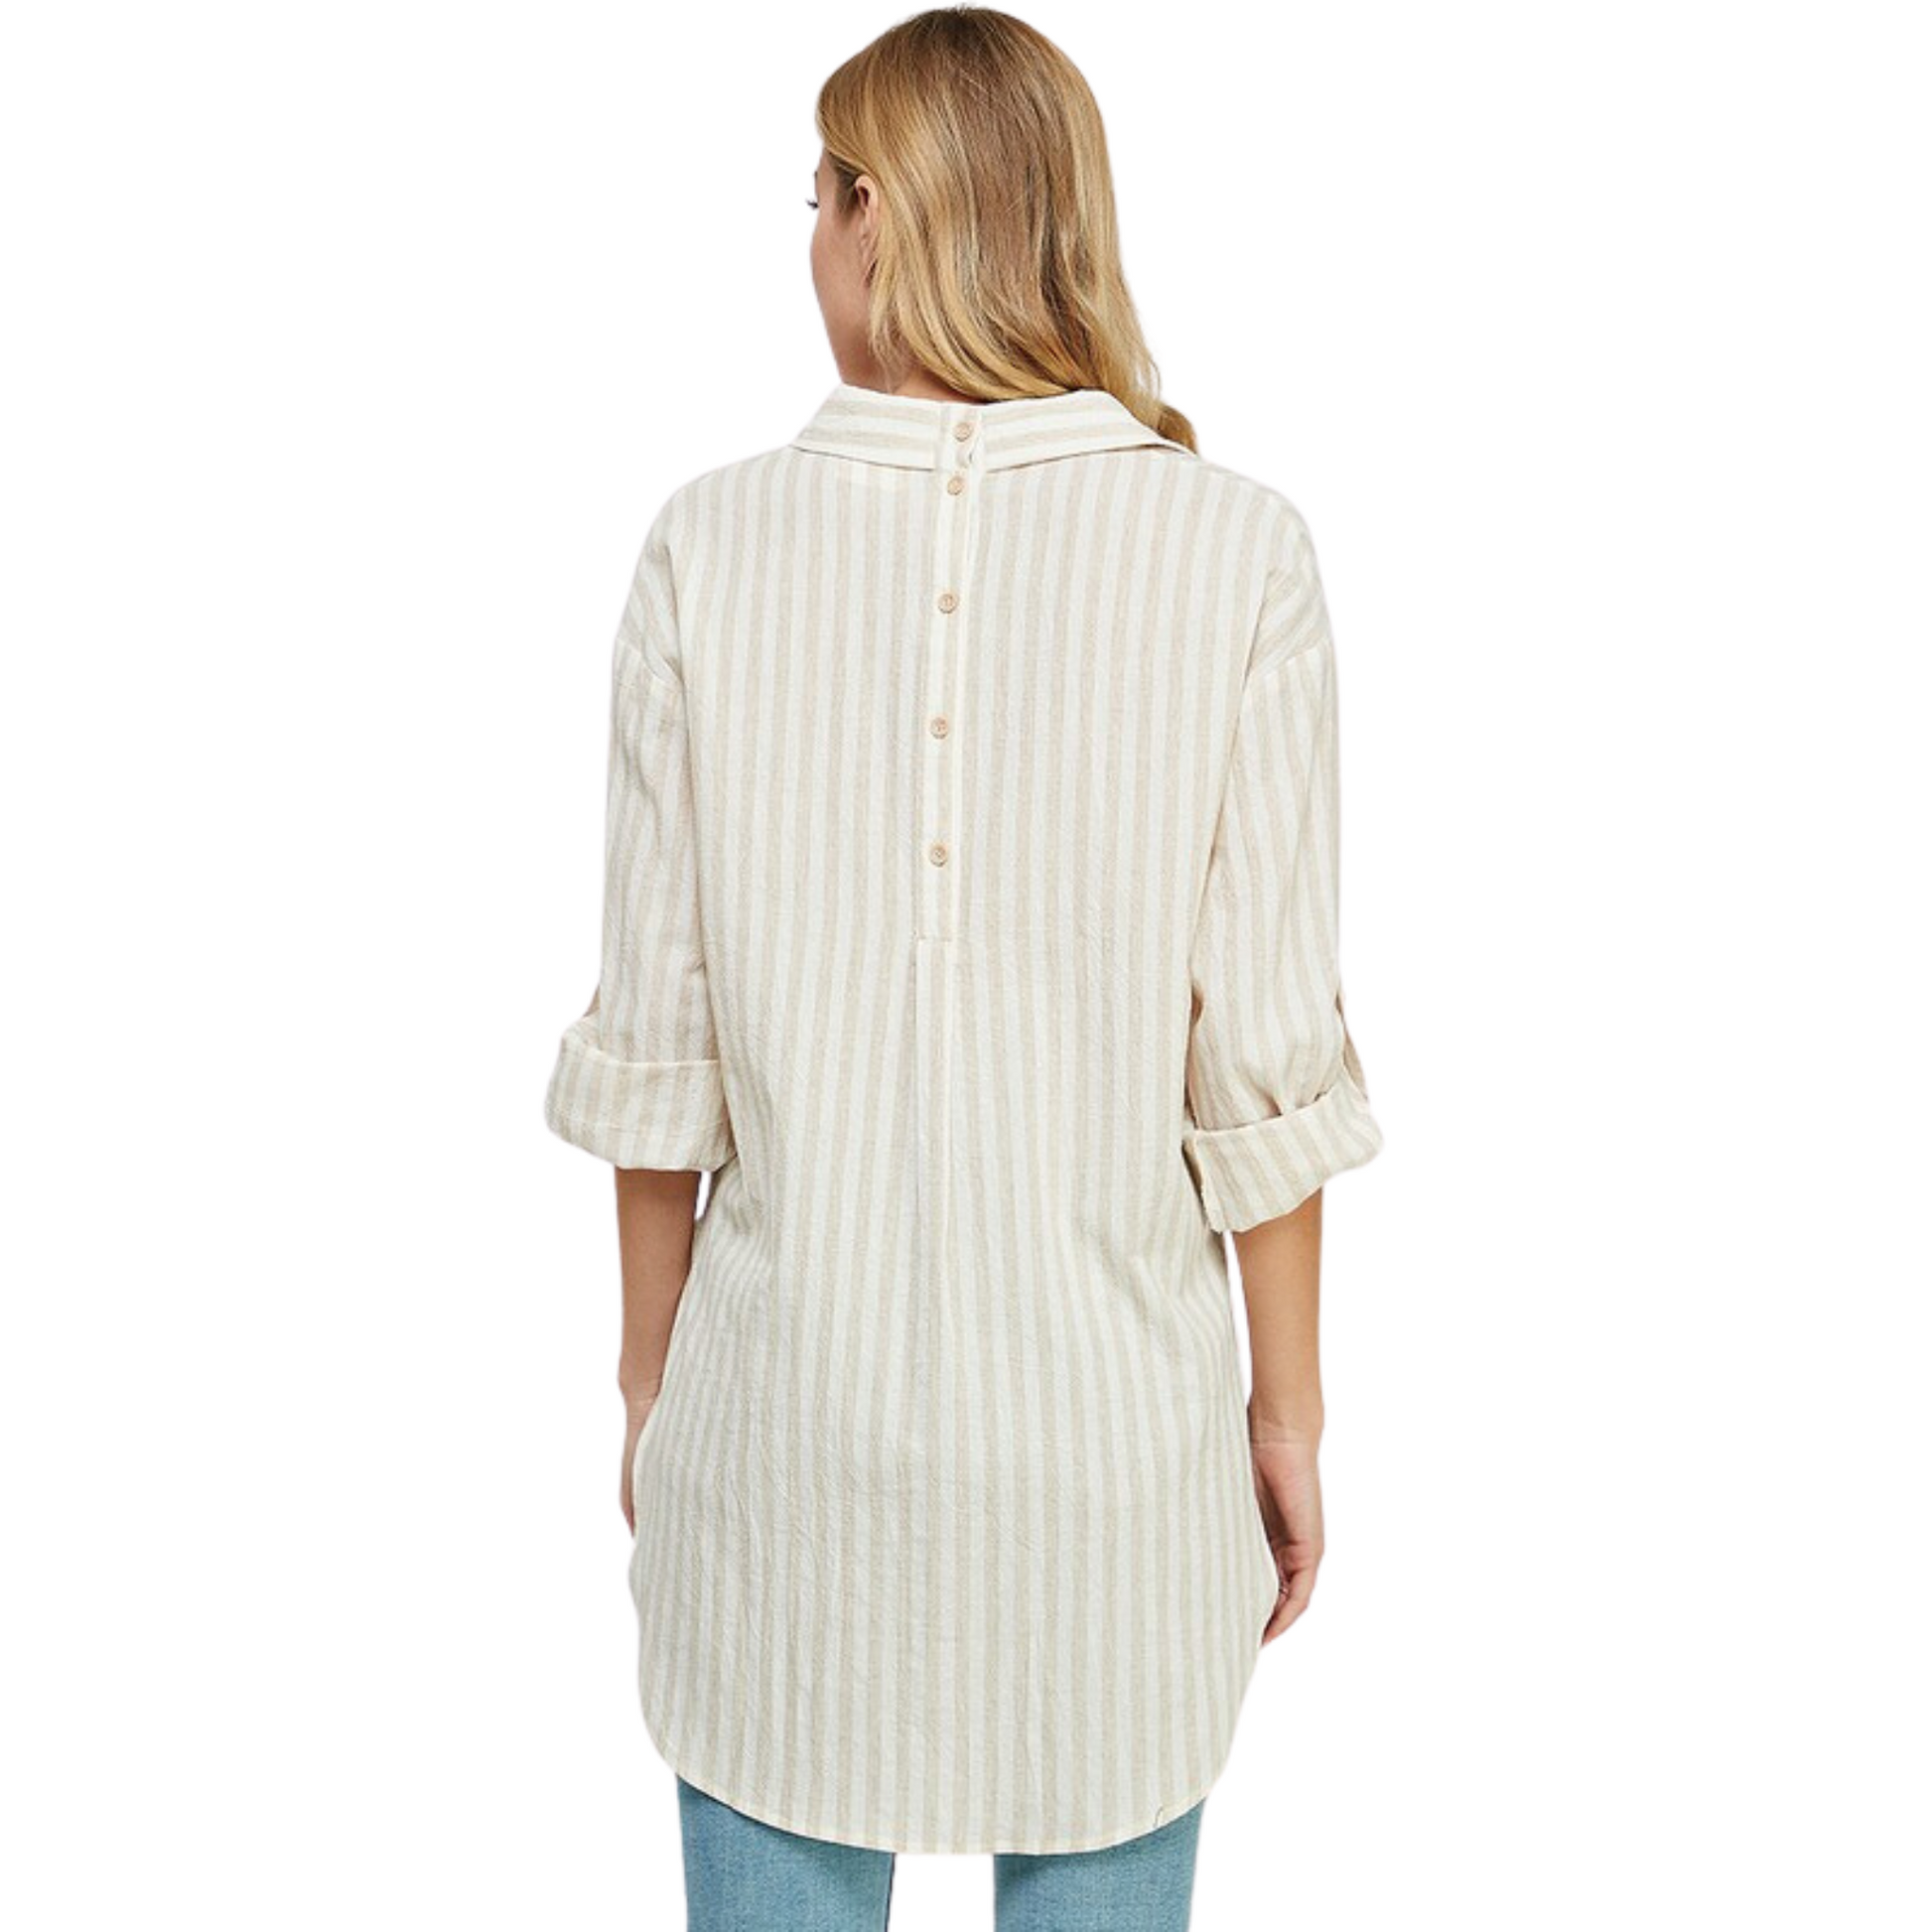 The Breezy Linen Boyfriend Shirt is the perfect mix of style and ease. Made from the best quality linen, this classic striped shirt is a stylish option for any wardrobe. The button-up design, collared neck, and contrast stripes make it a versatile piece for any occasion.